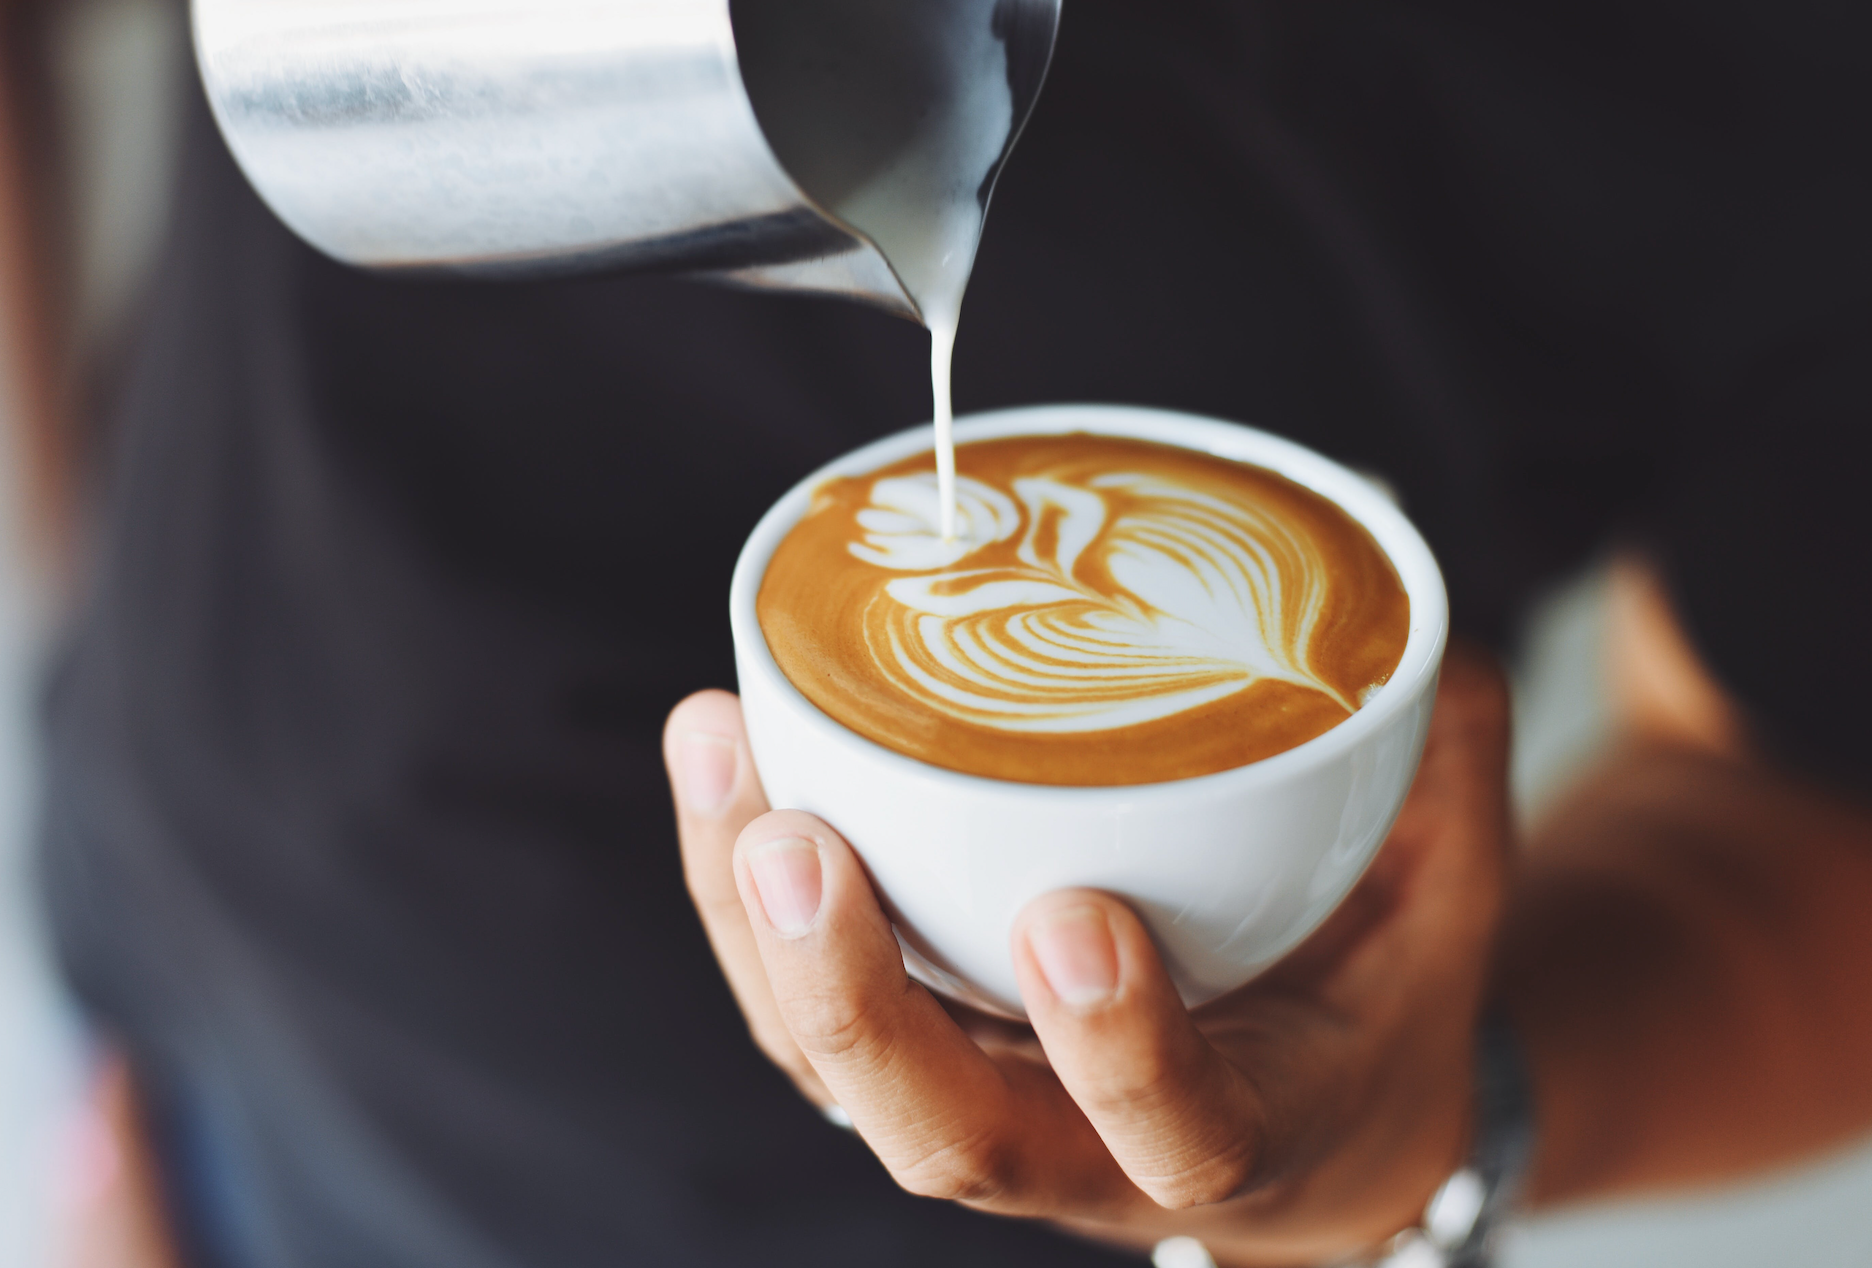 Barista pouring steamed milk into a white ceramic cup, creating a detailed and symmetrical latte art design on the surface of a freshly brewed cappuccino, held securely in their hands.